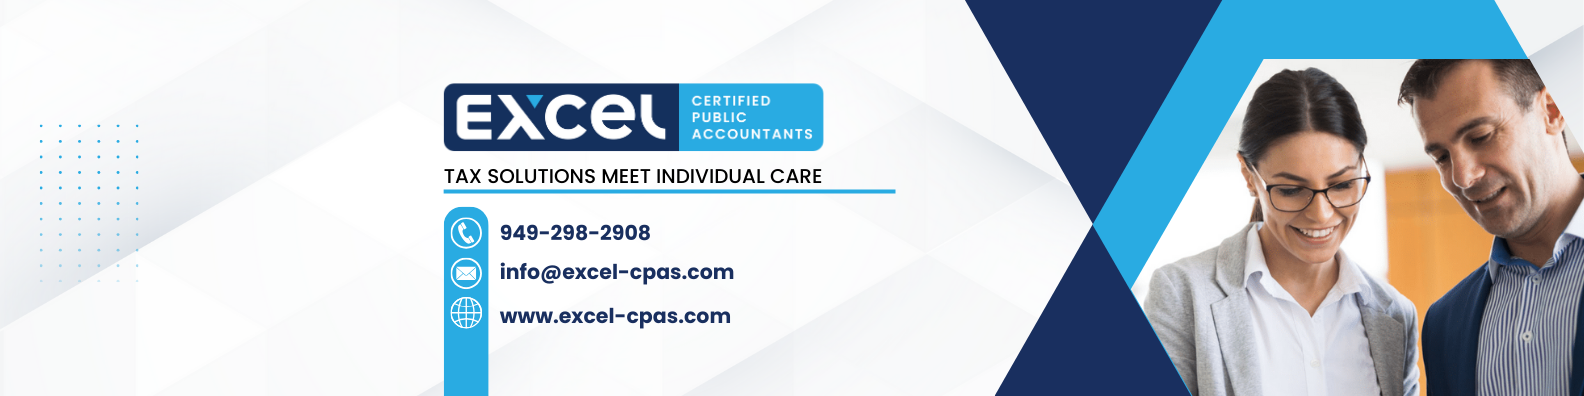 SoCal Tax Advisors by EXCEL CPAS, P.C.